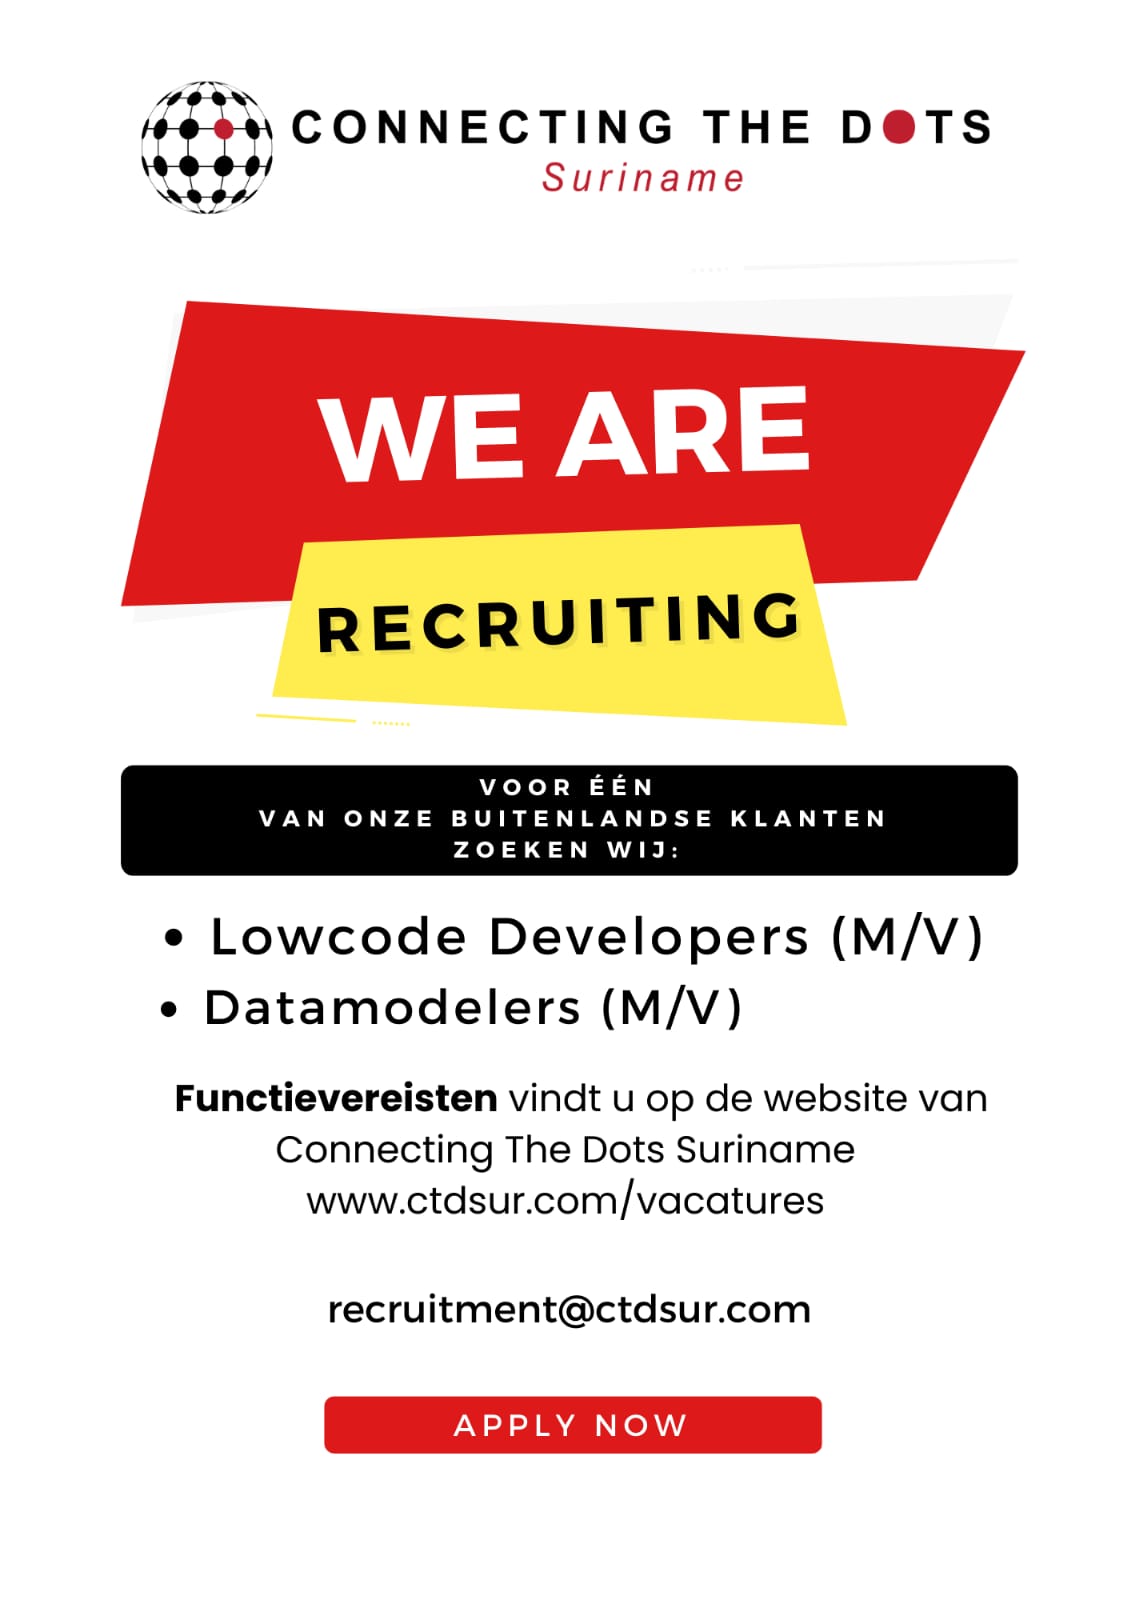 We are recruiting.